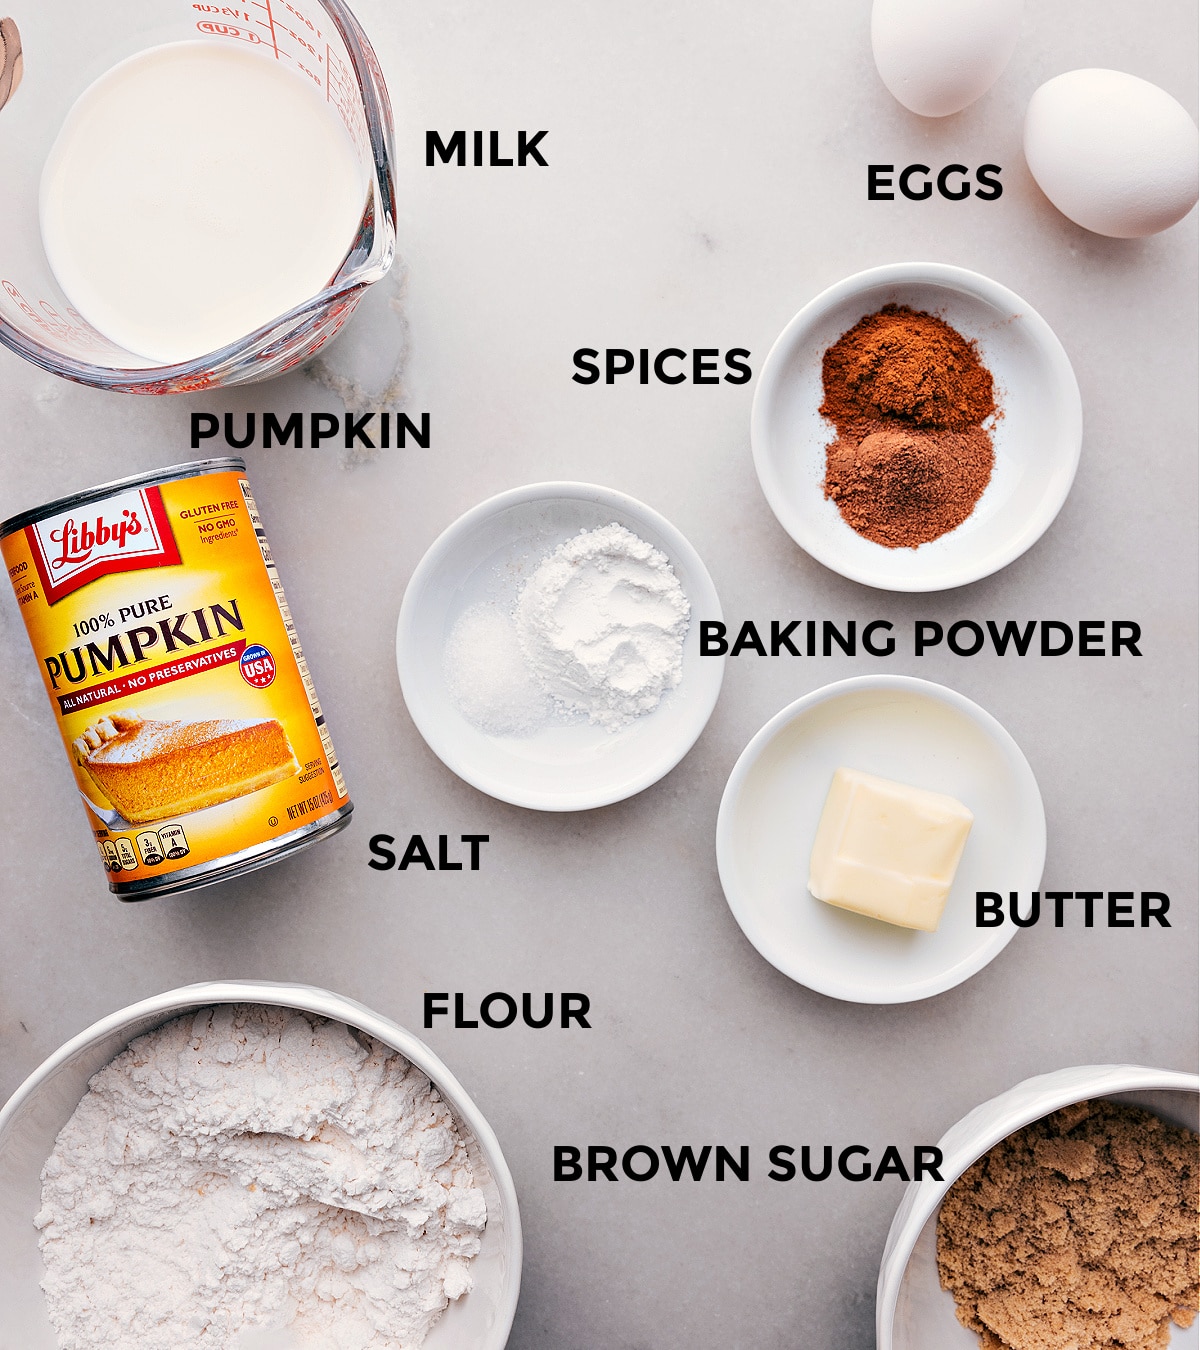 Laid-out ingredients for making Pumpkin Pancakes.